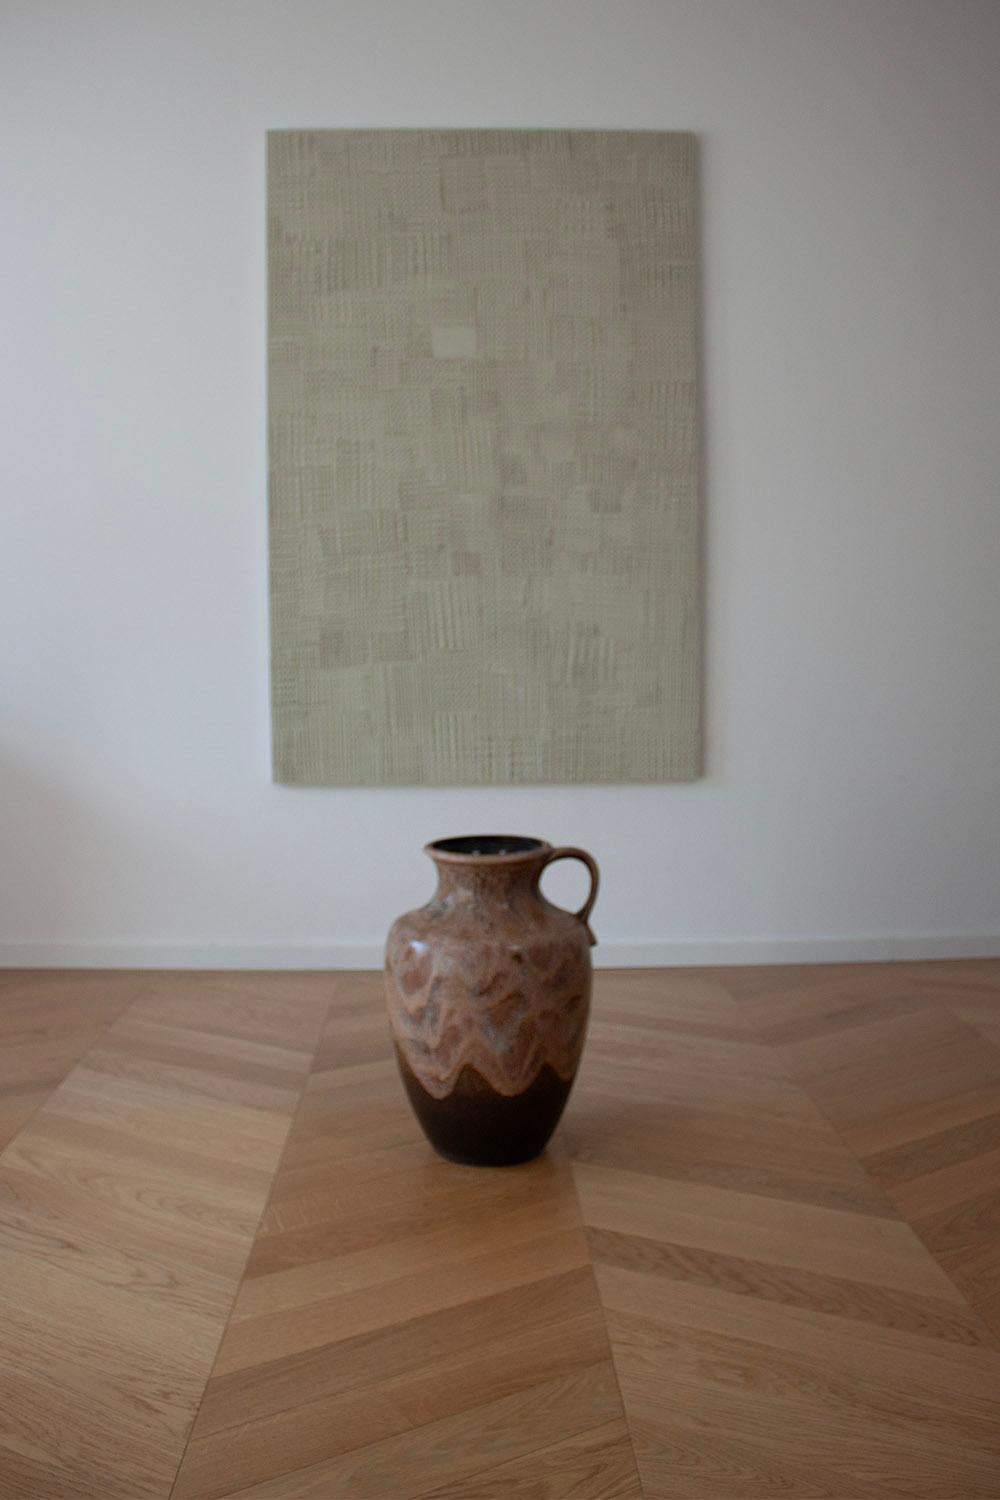 This Dümler & Breiden ceramic floor or branch vase is a great example of the 1960-1970 German ceramic design style. This style is recognized through its brutalist influence combined with modern organic shapes. This large ceramic floor vase is the